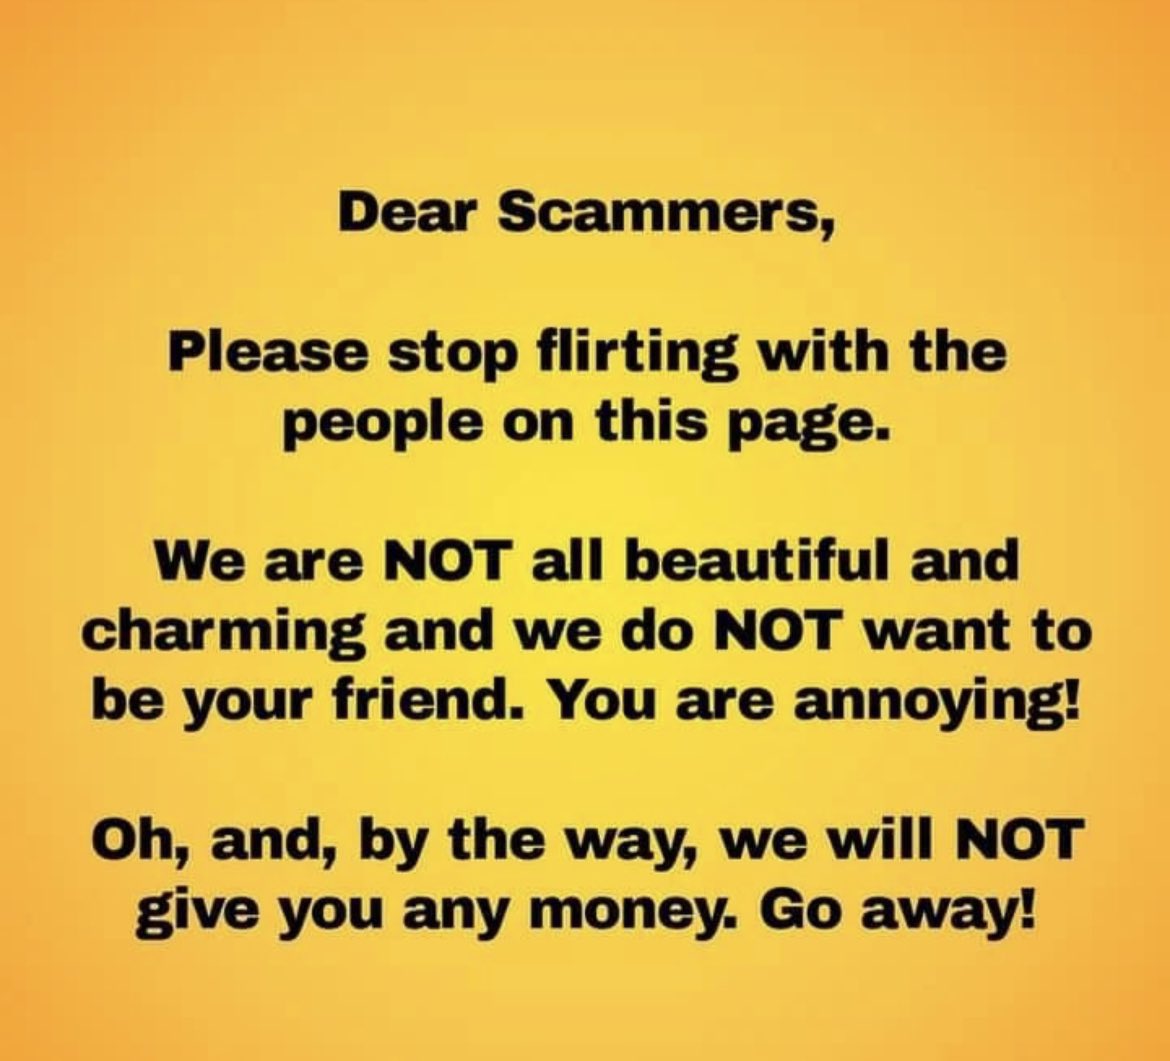 Fu*k scammers!